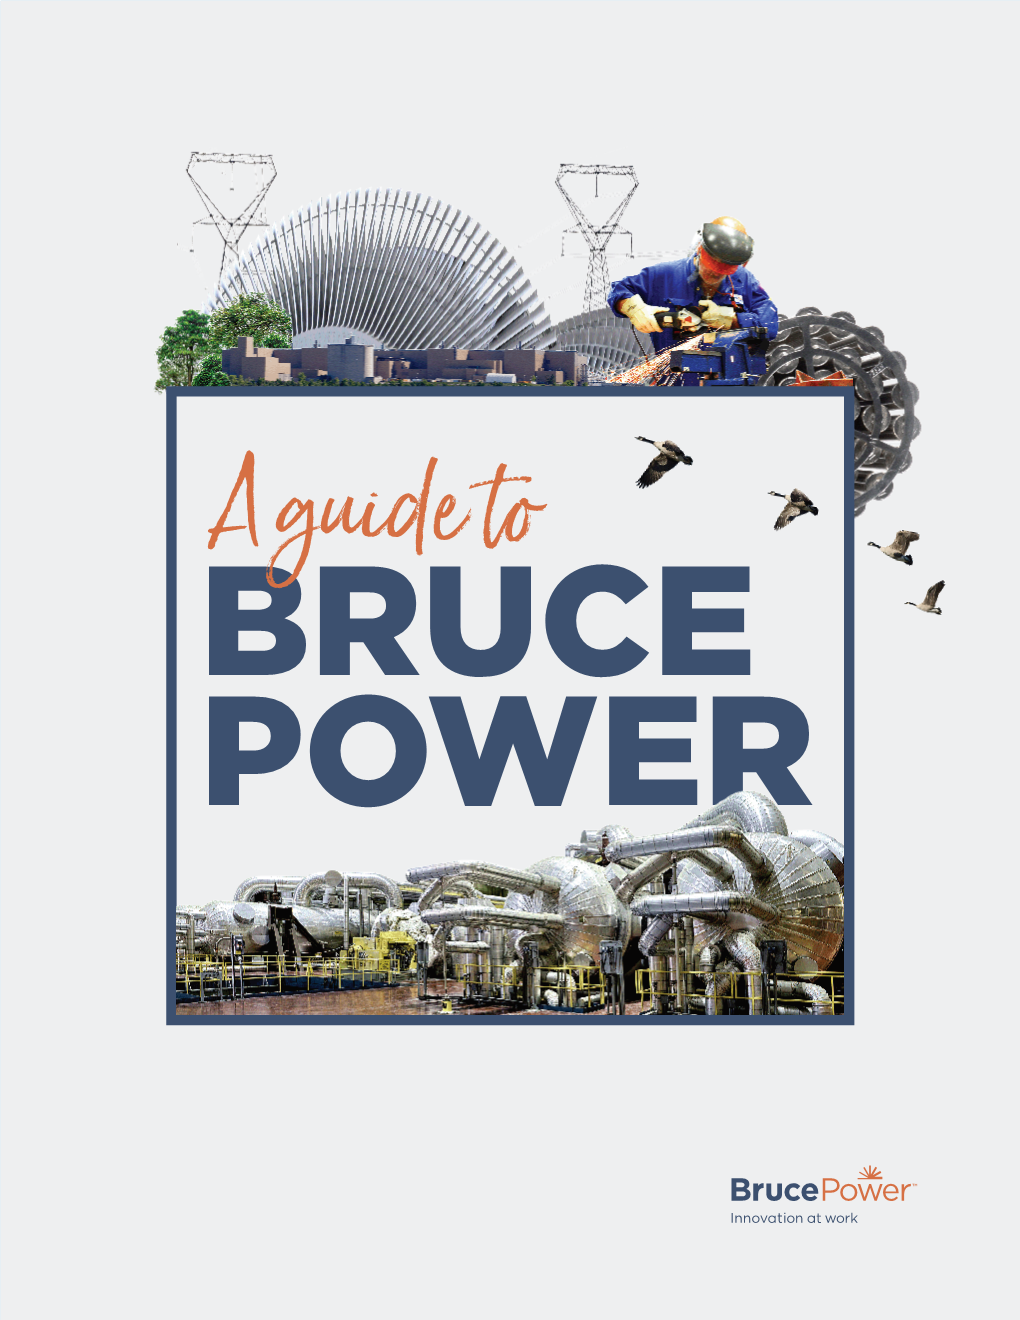 A Guide to BRUCE POWER